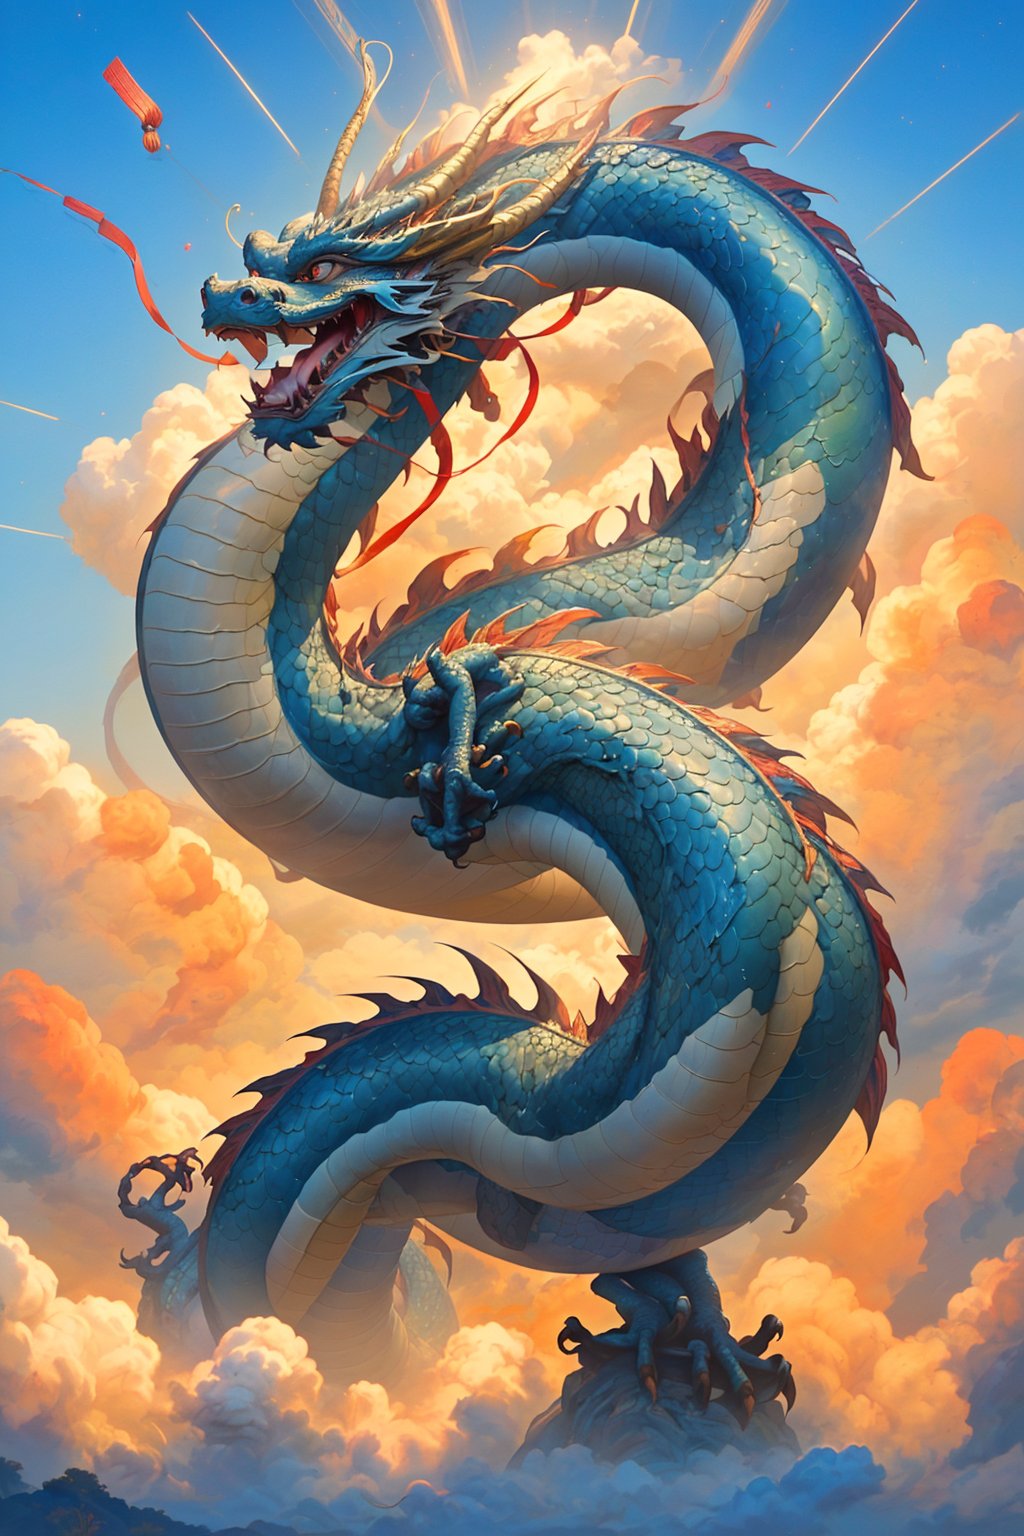 dragon-themed,dragonyear,
In the vast blue sky, the East Chinese dragon soars with immense power. Its sinuous body glimmers with iridescent scales as it gracefully glides through the air.  clouds part and the ground trembles, a symbol of its awe-inspiring might and dominance over the heavens.